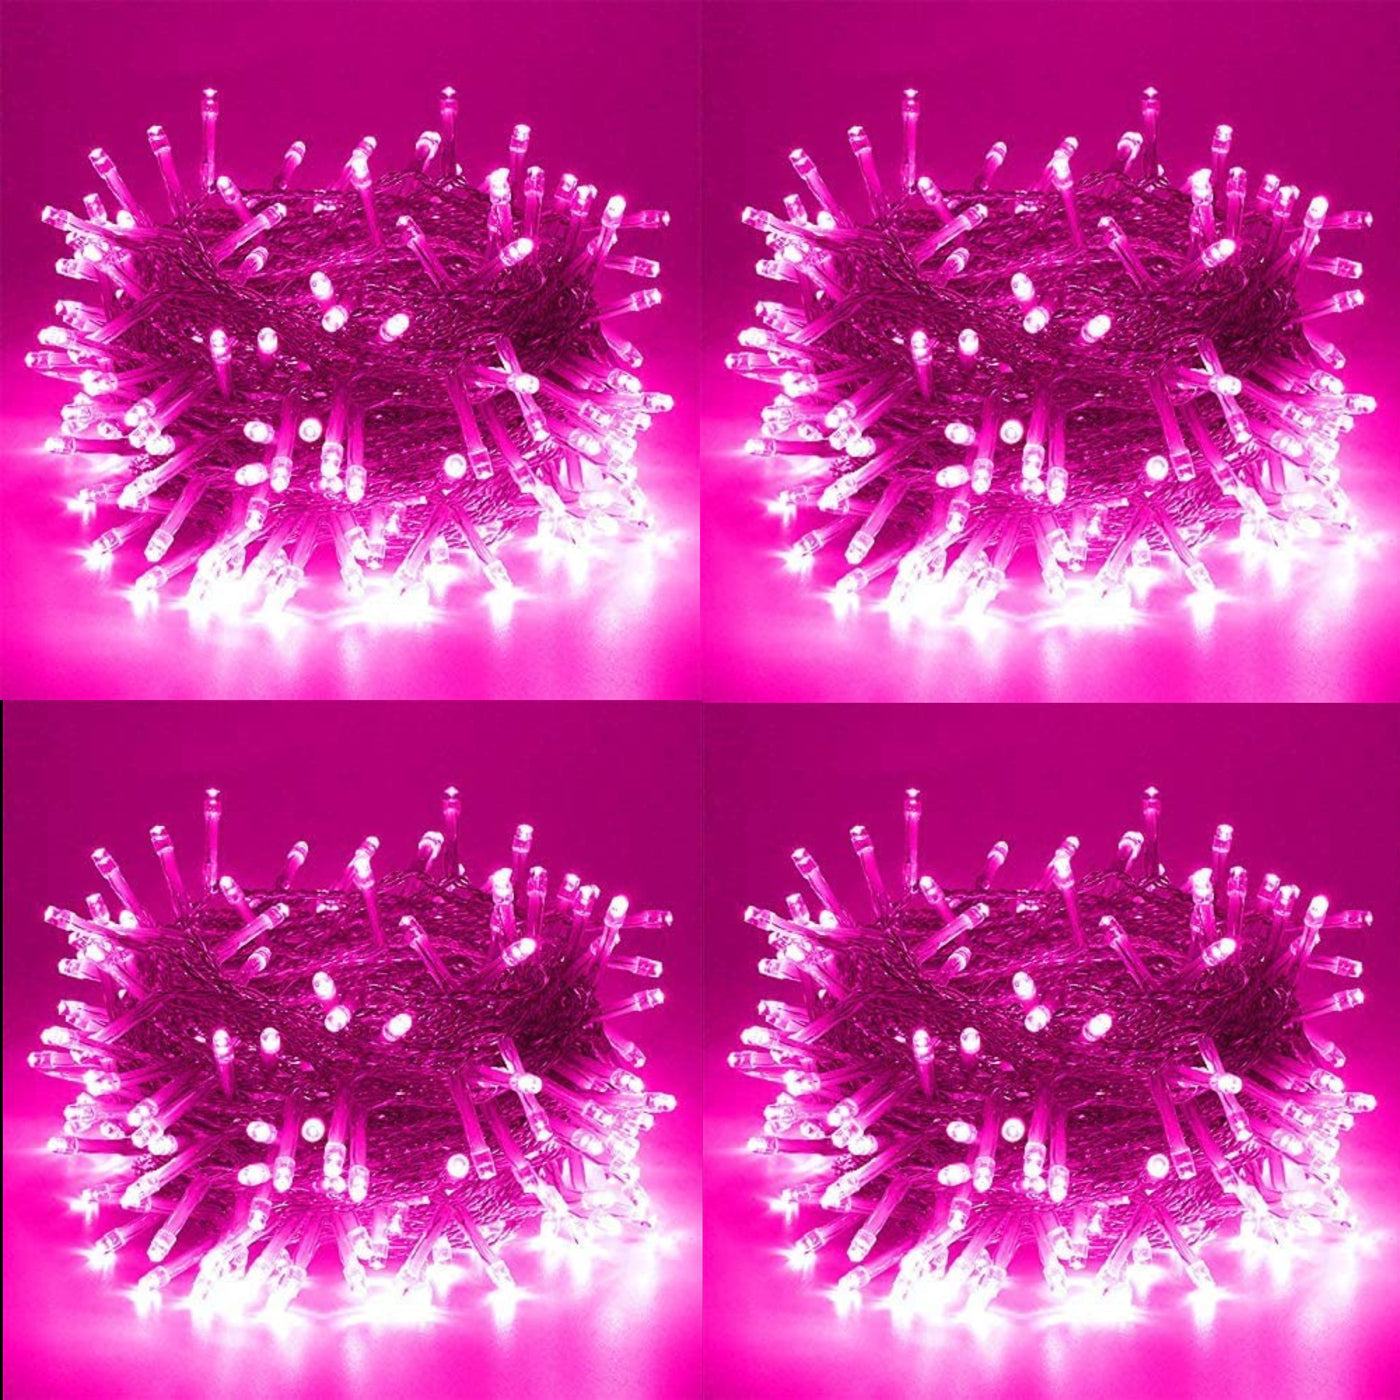 DecorTwist LED String Light for Home and Office Decor| Indoor & Outdoor Decorative Lights|Christmas |Diwali |Wedding | Christmas | Diwali | Wedding |12 Meter Length |(Pack of 4) (Pink)